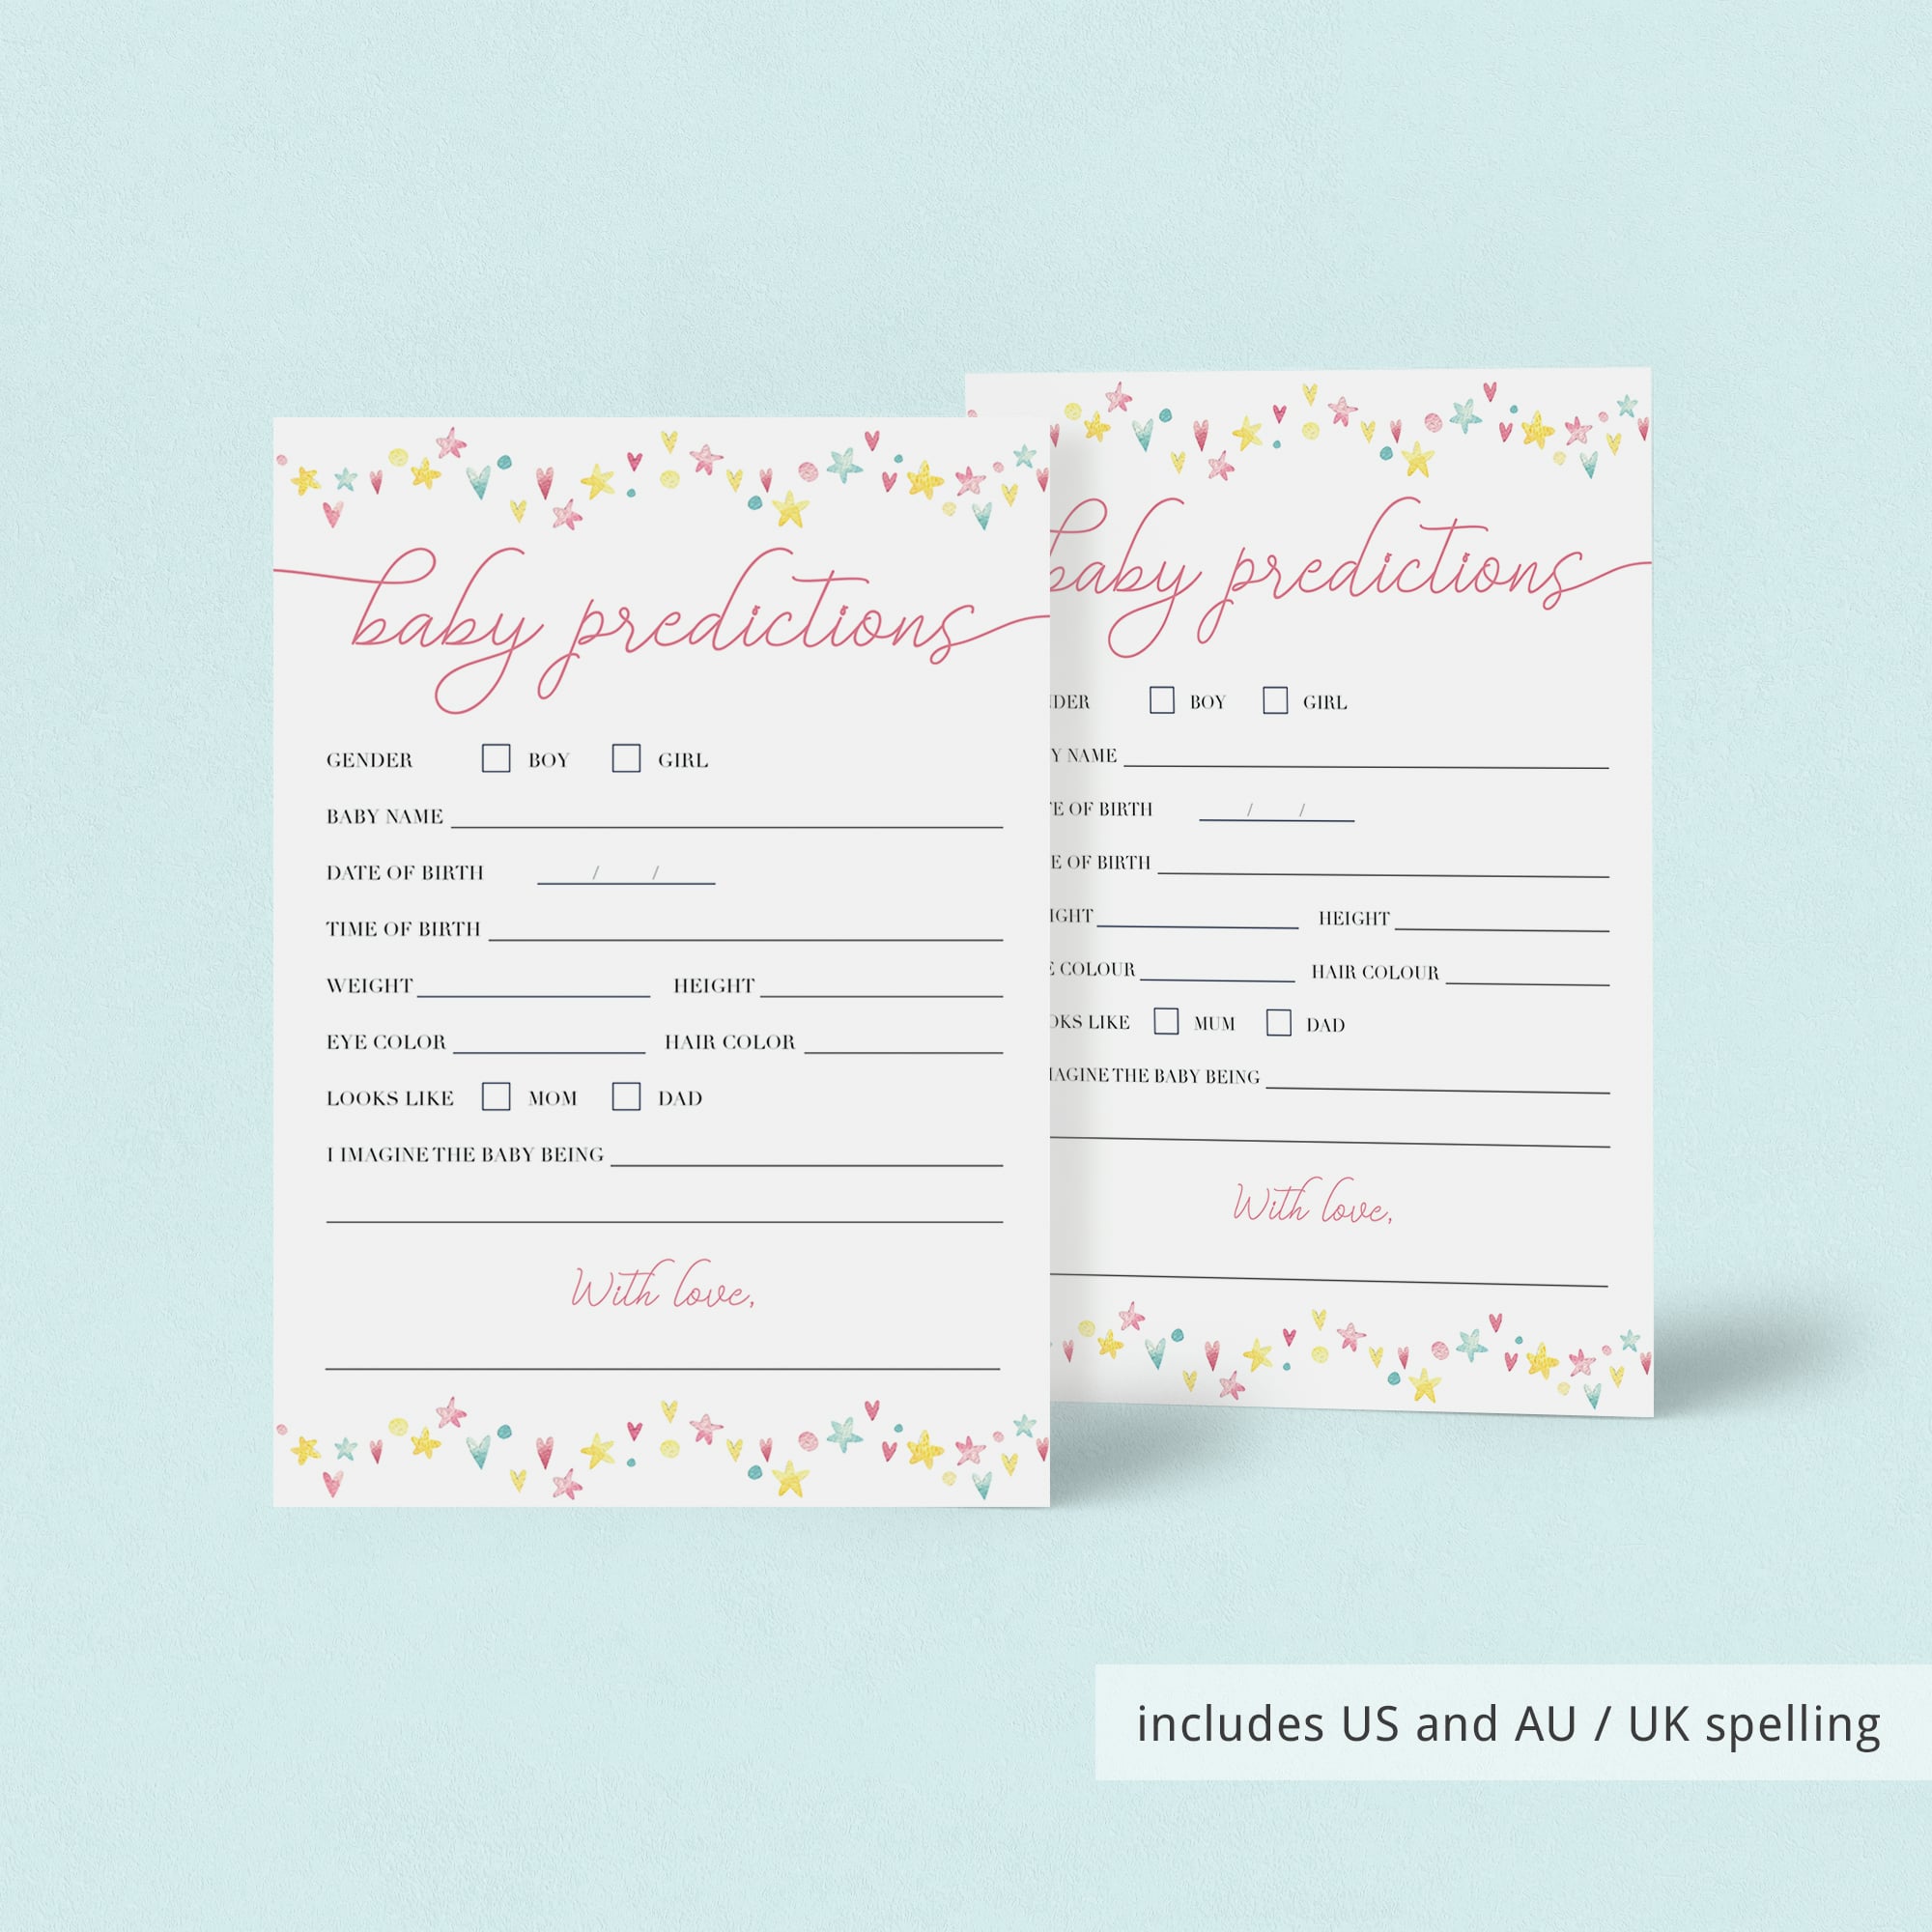 Printable baby predictions game with watercolor hearts and stars by LittleSizzle